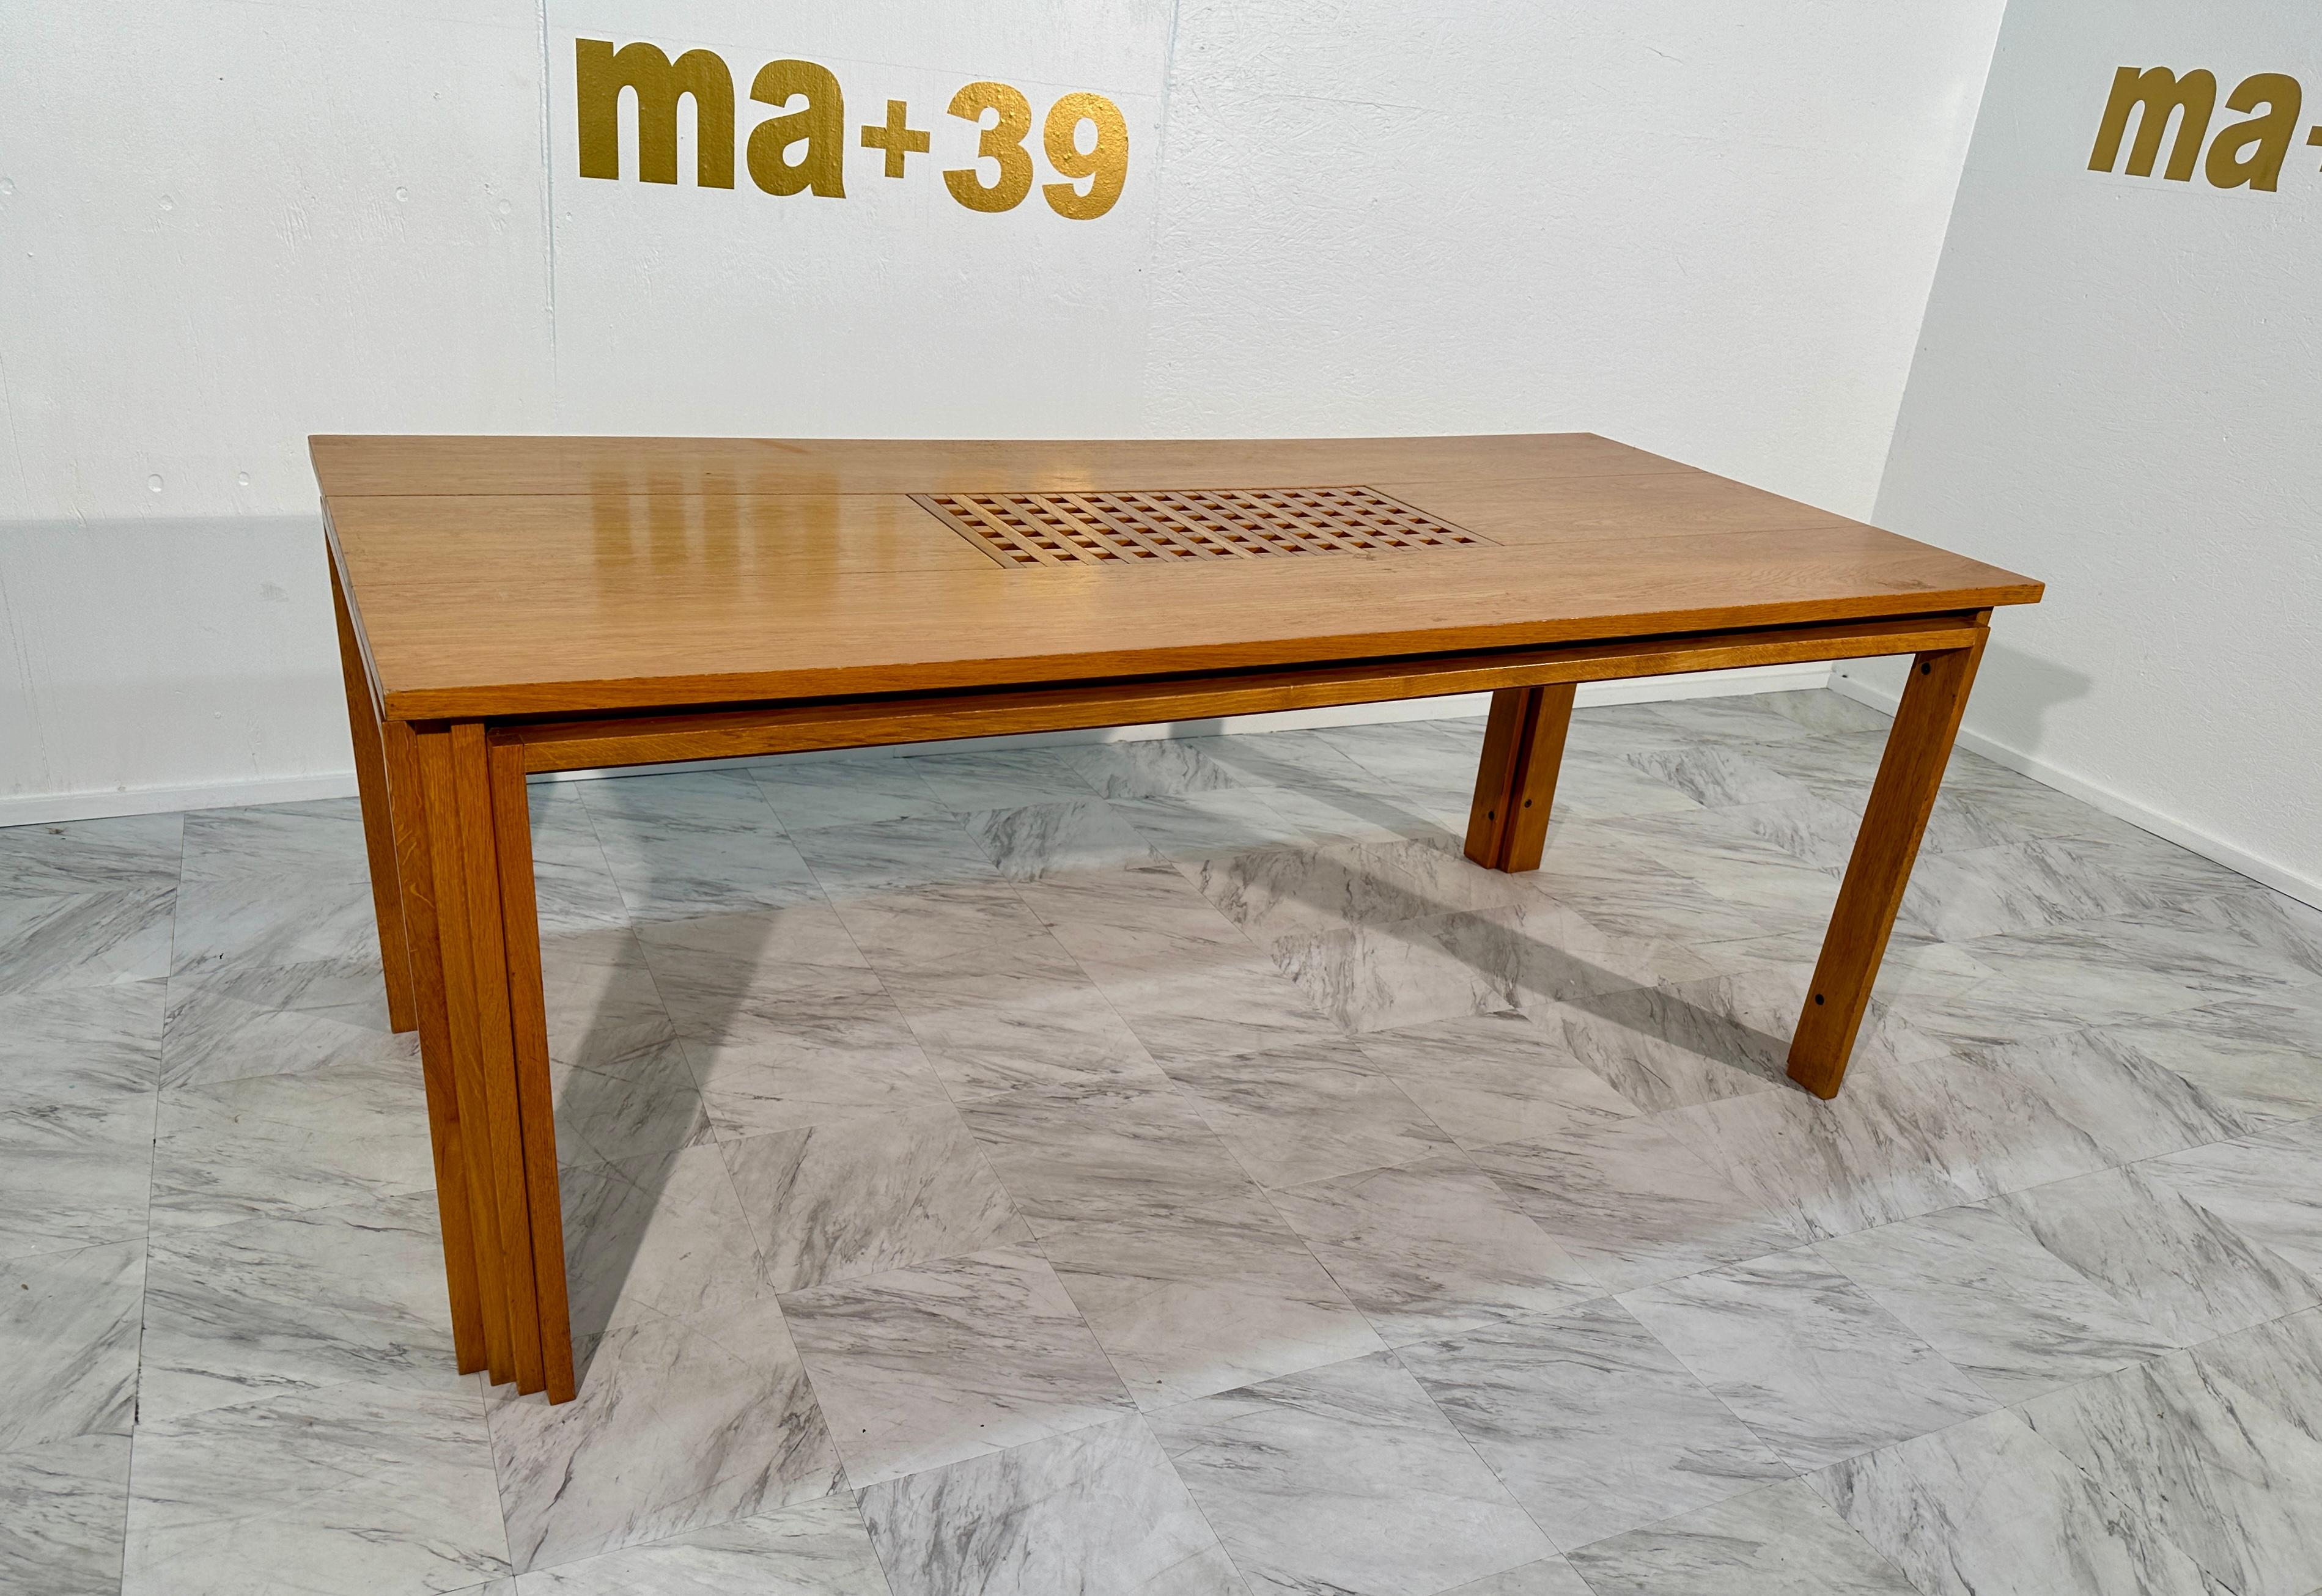 The Mid Century Italian Dining Table by Pozzi & Verga, crafted in the 1960s, is a masterpiece of mid-century design. Exhibiting a timeless elegance, this rectangular dining table boasts a fully wooden construction, showcasing the natural beauty of